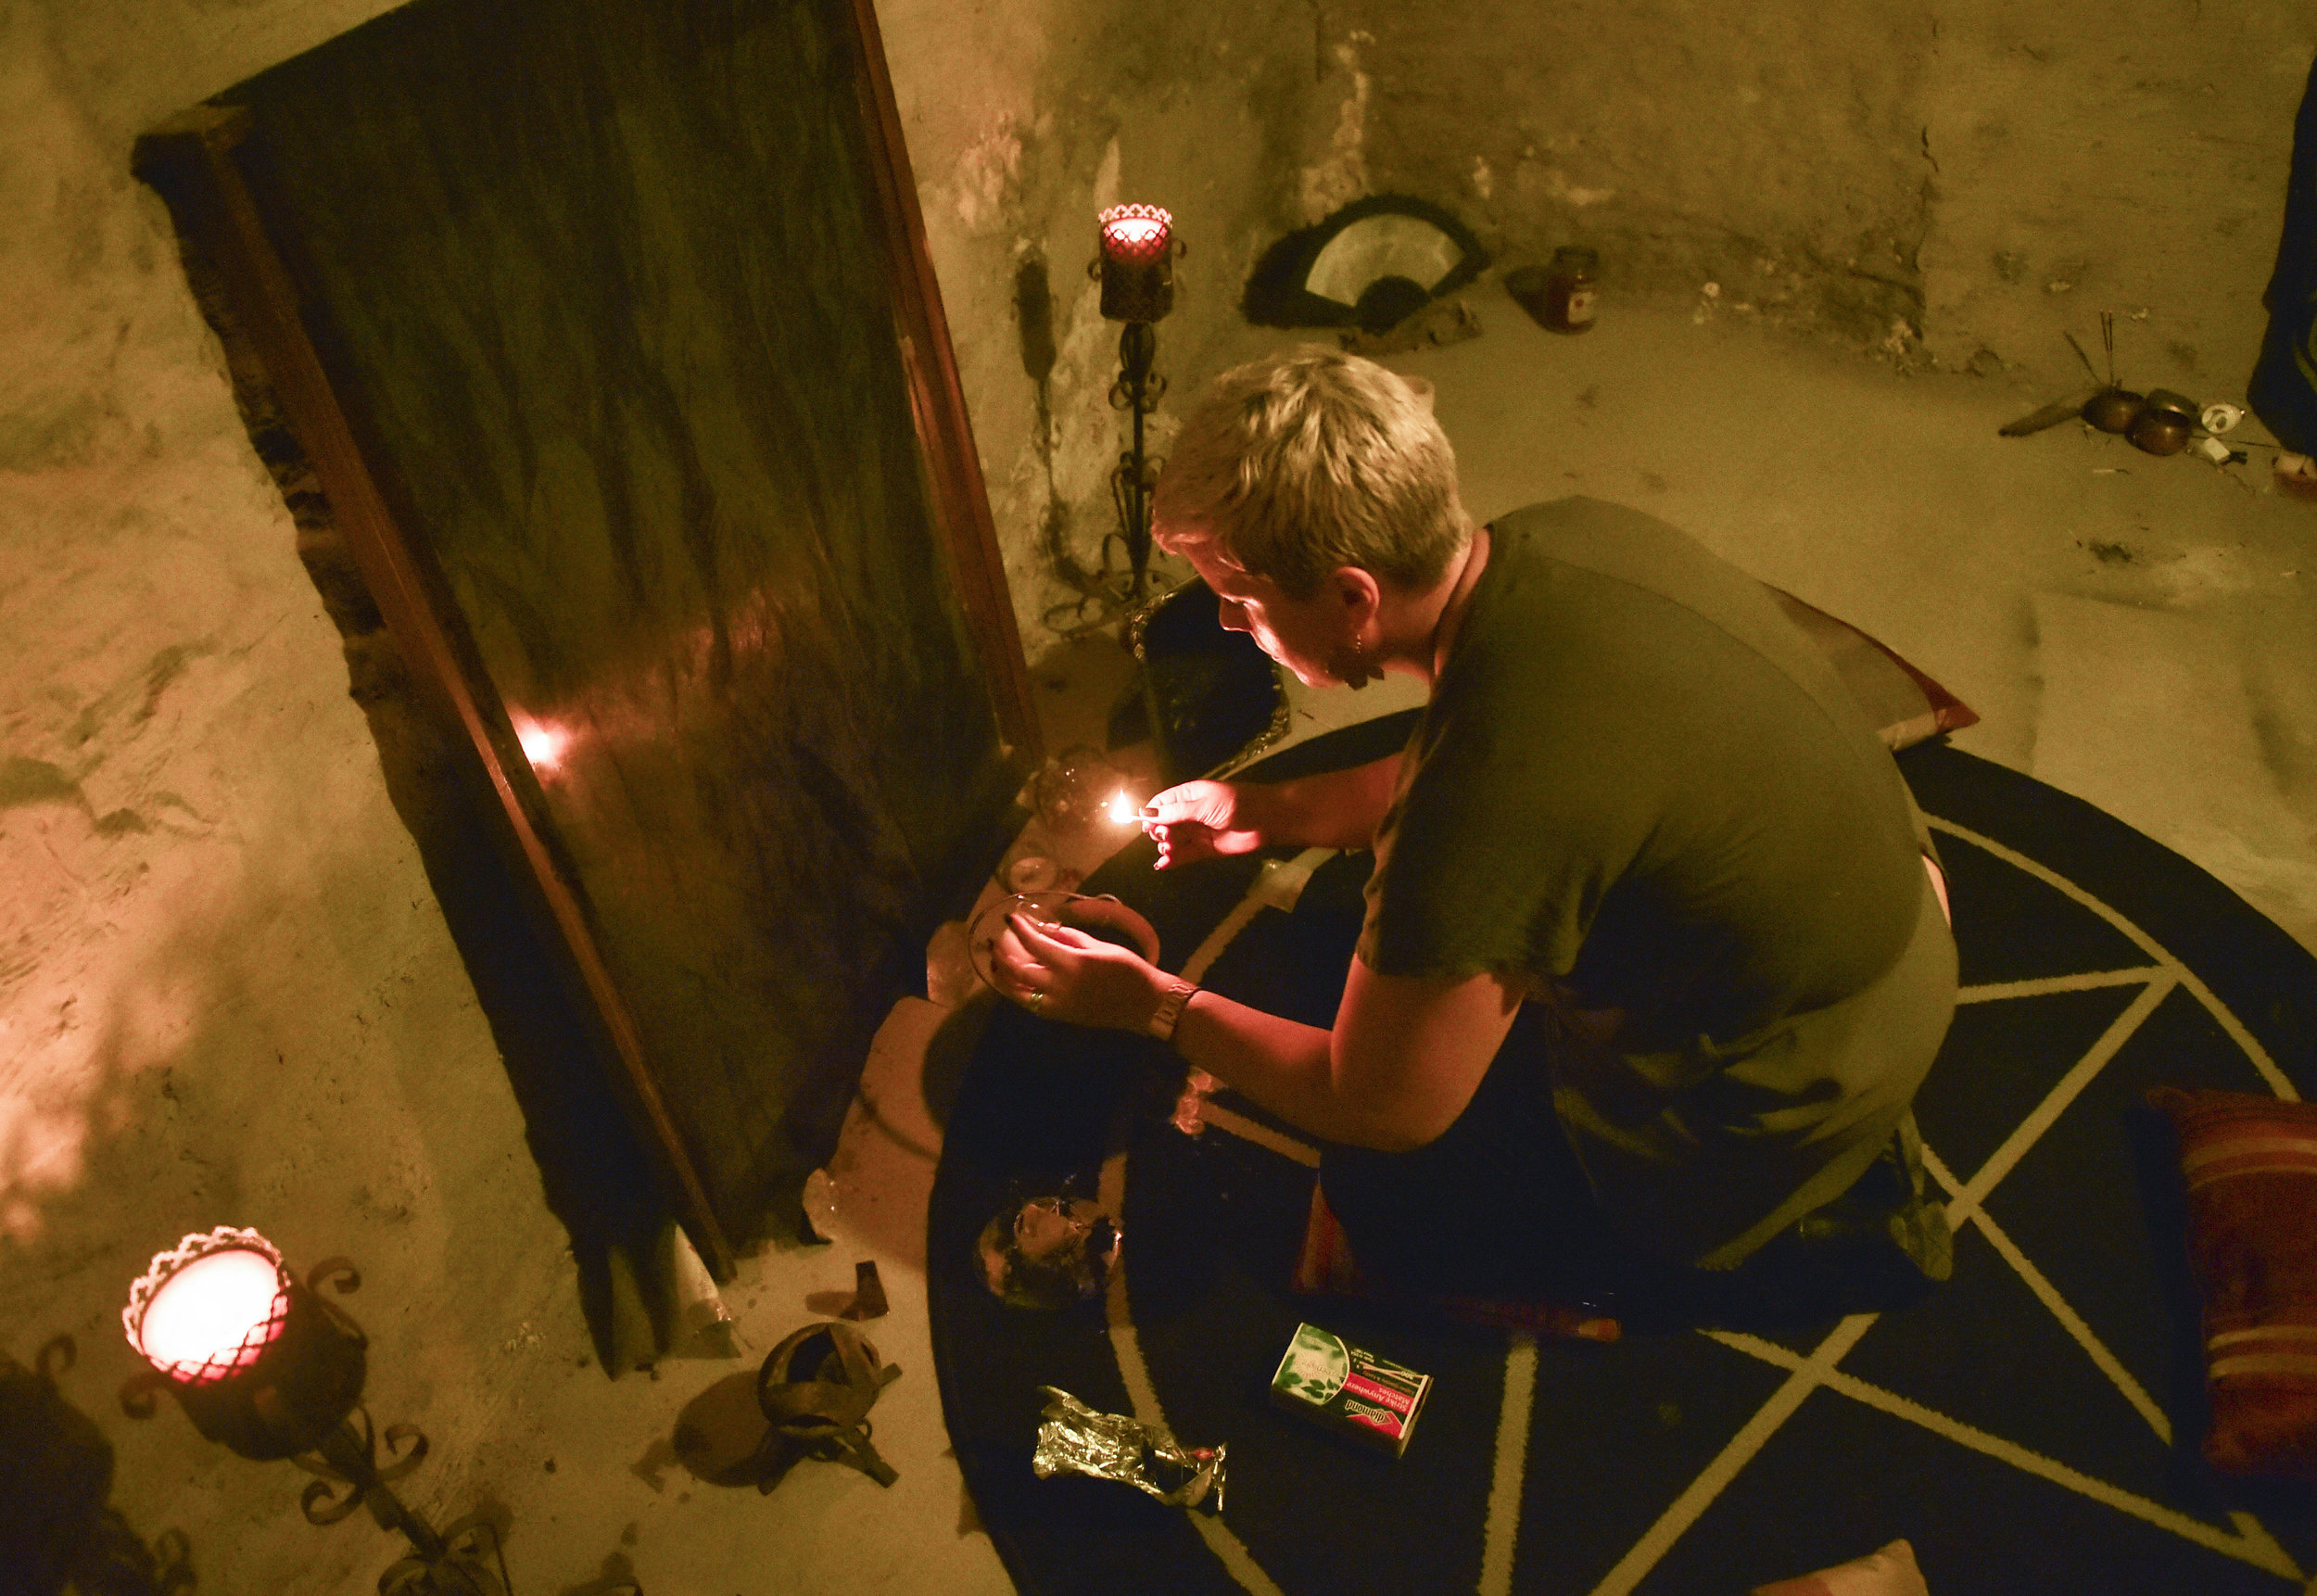  Jessica, of Rock Island, casts a protection spell on Monday, Oct. 8, 2018, in the basement of her home for her group of witches. The spell is cast to protect the group from people who may want to do them harm. 